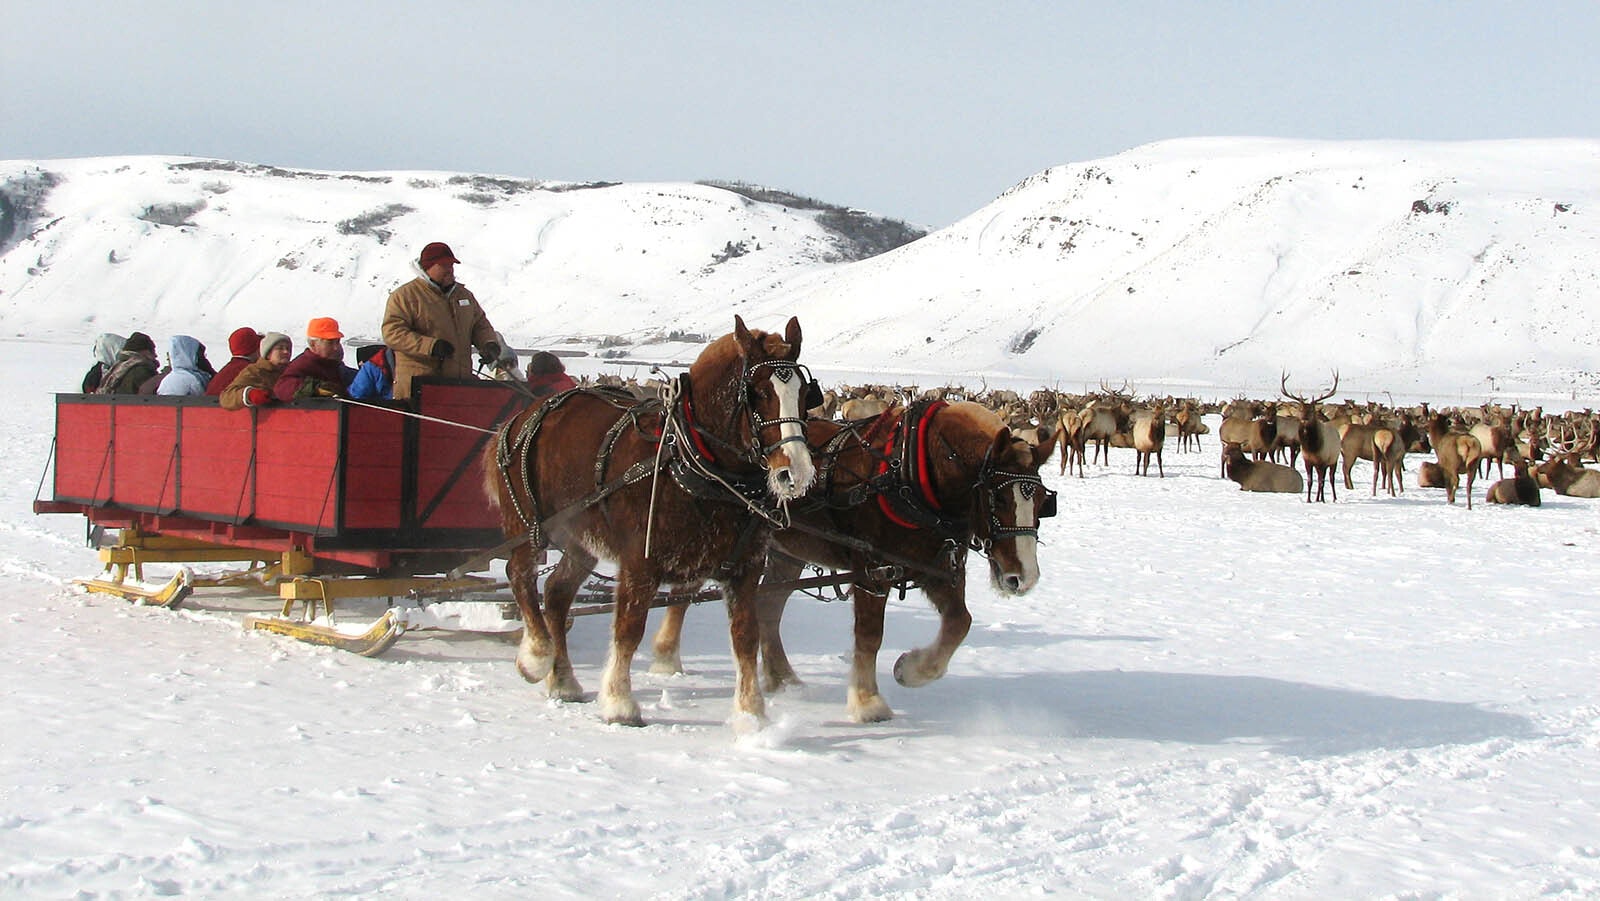 The annual sleigh rides through the National Elk Refuge near Jackson, Wyoming, gets people almost close enough to touch the thousands of wild elk that come down to feed there.